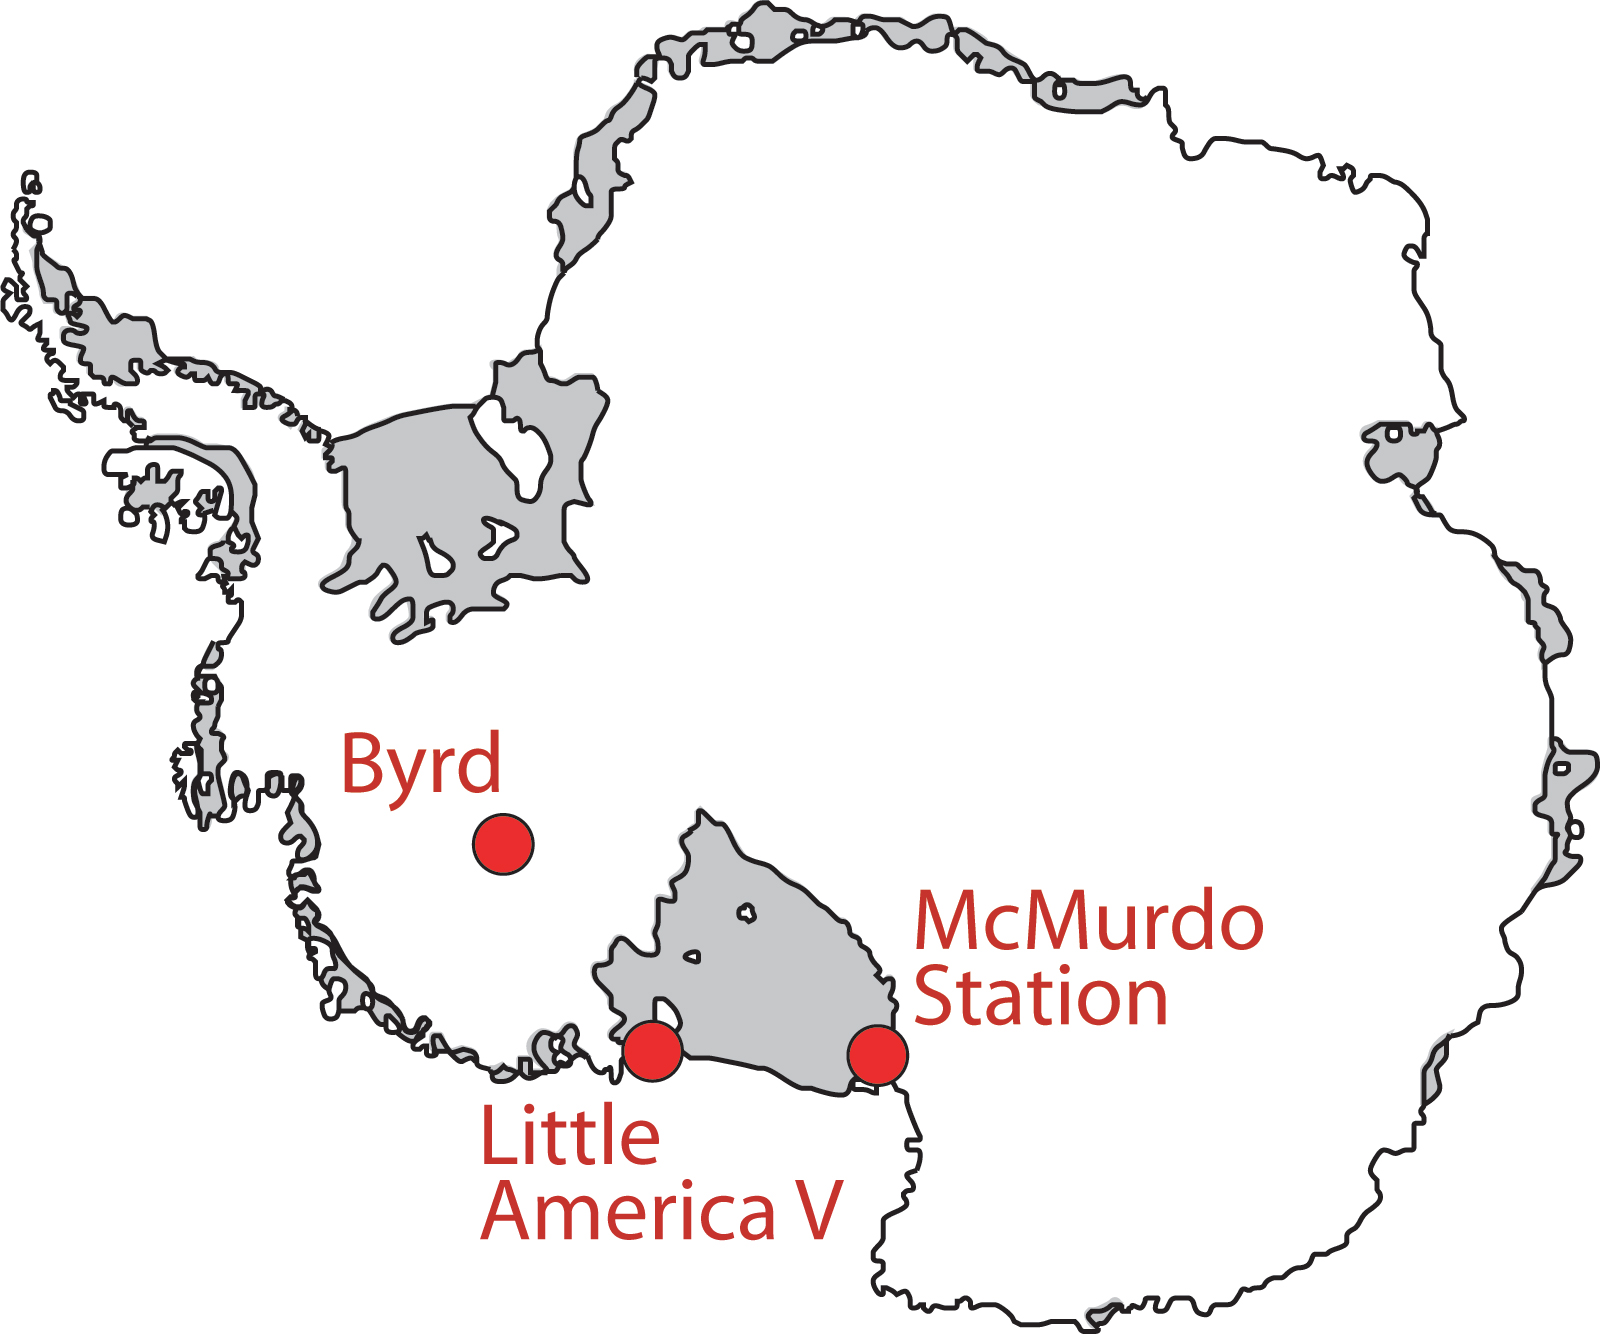 Map of Antarctica showing locations mentioned in the text